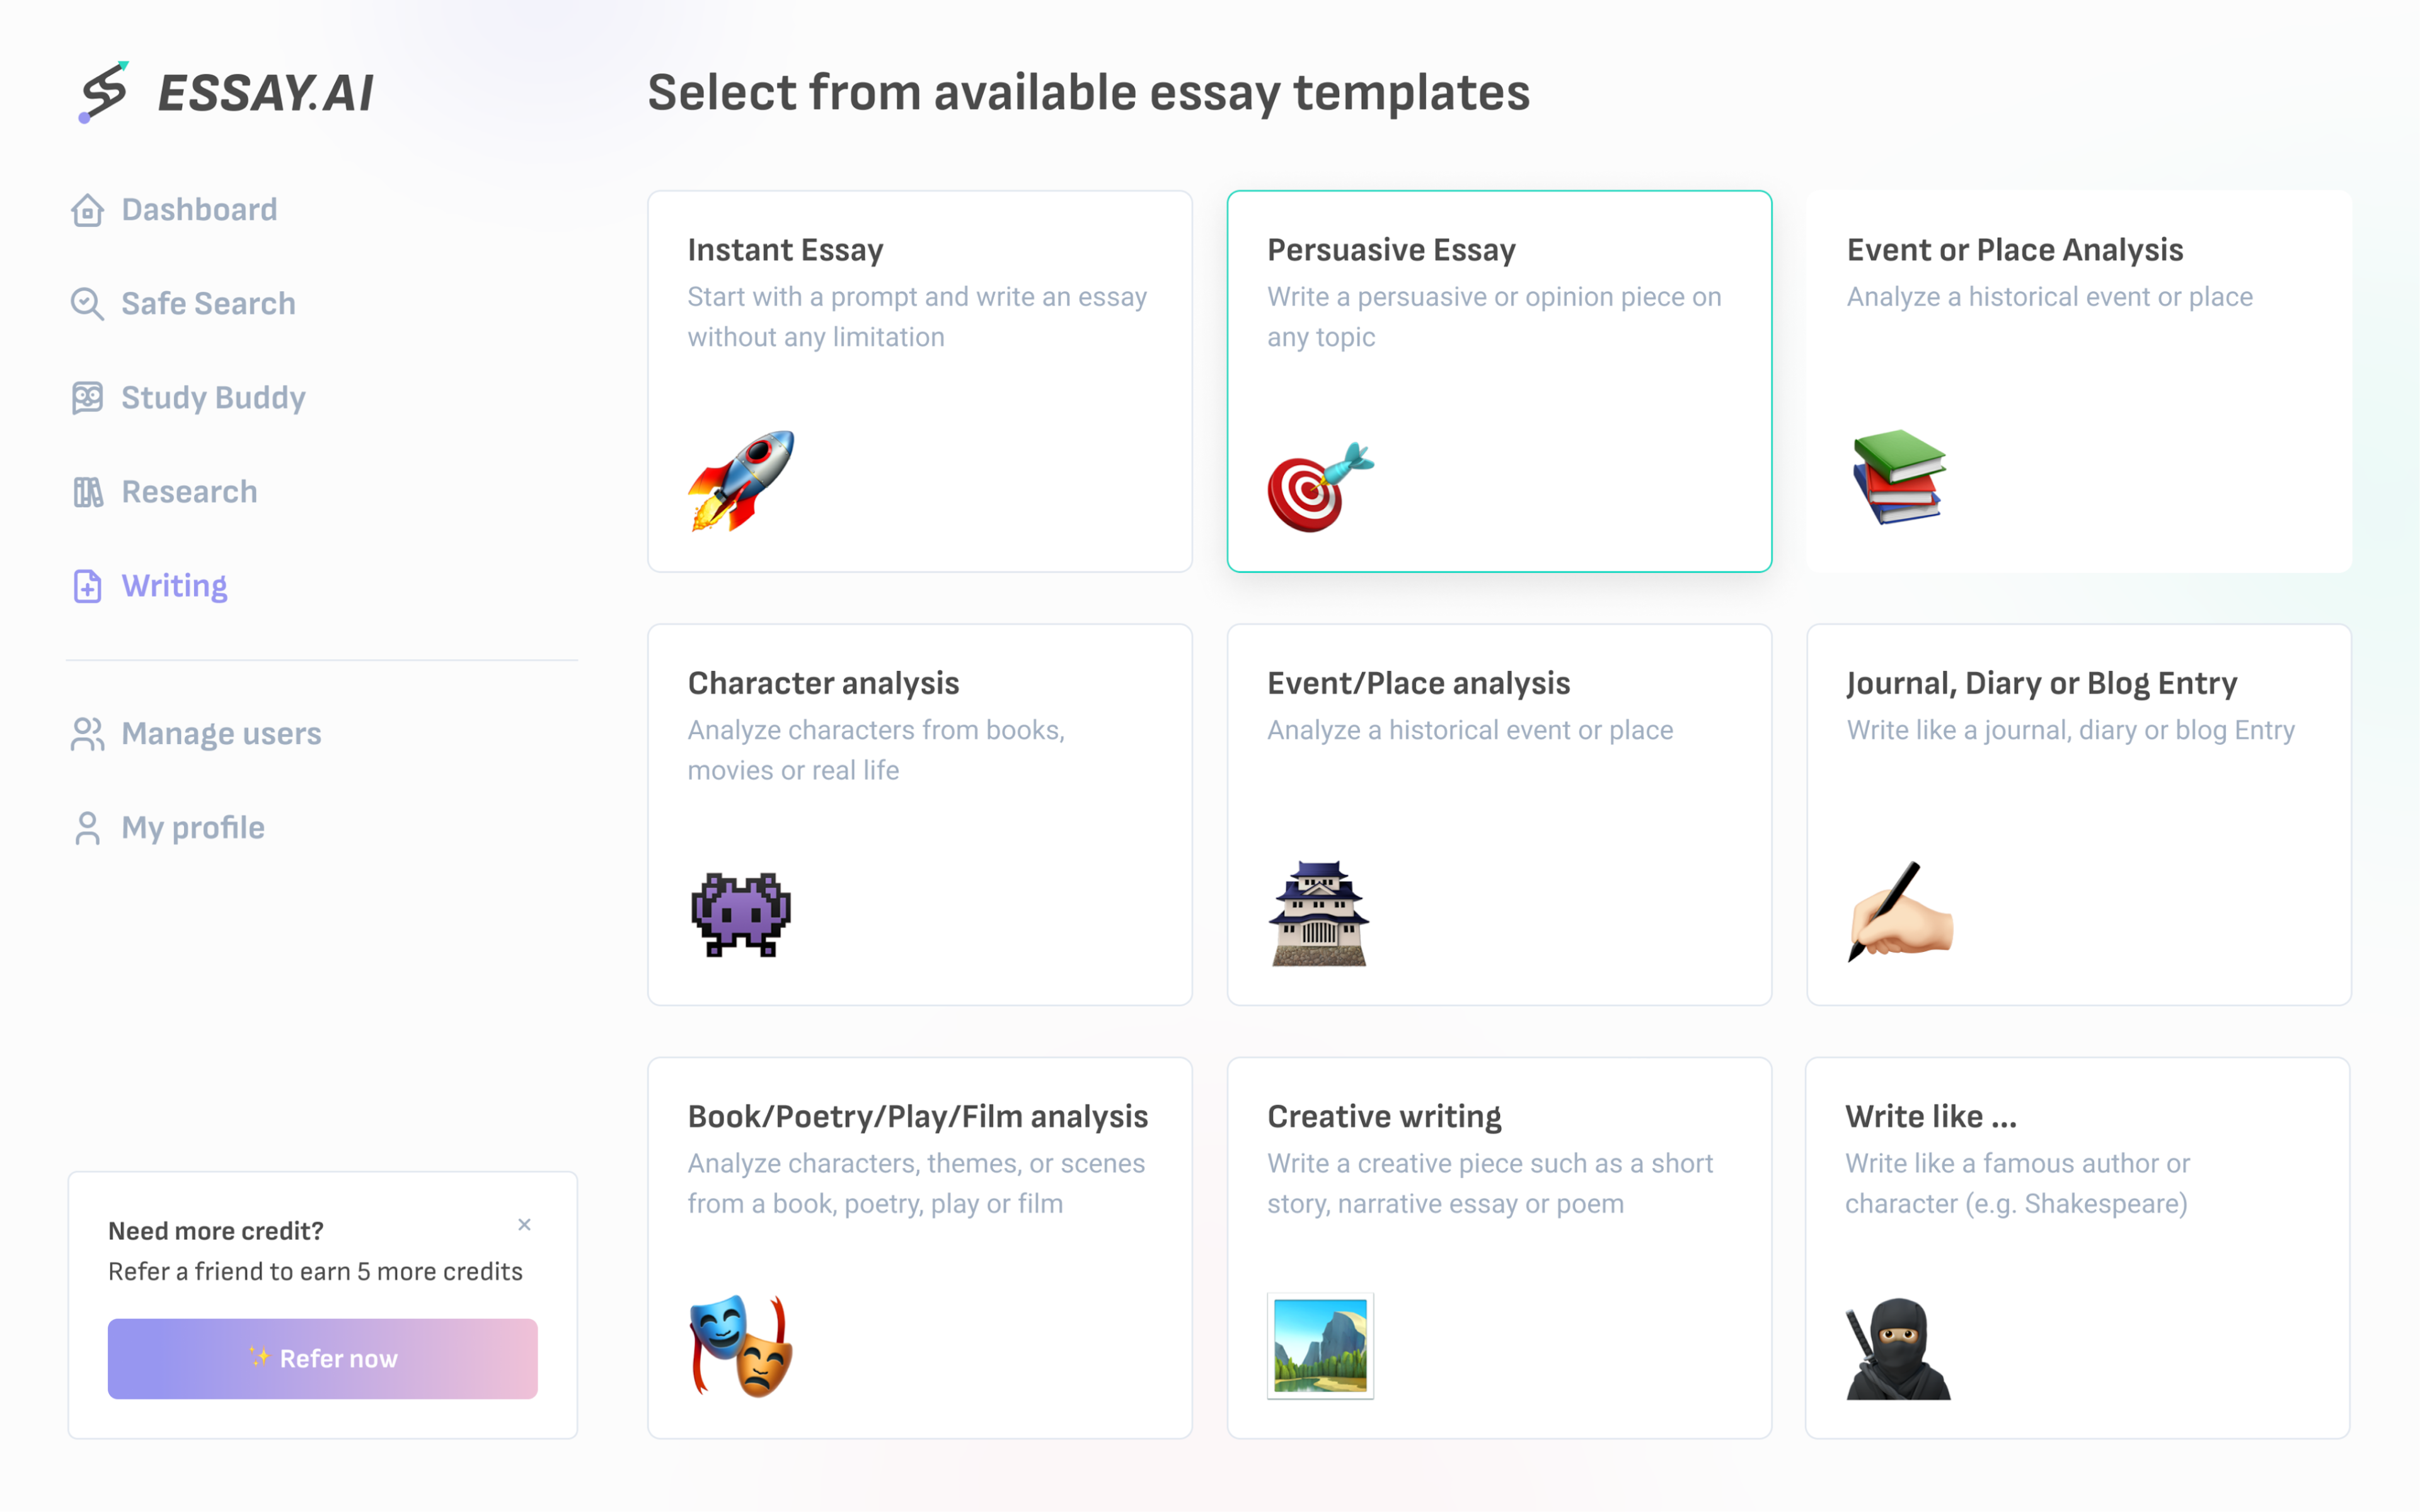 Screenshot of the Essay AI app showing various essays for writing.